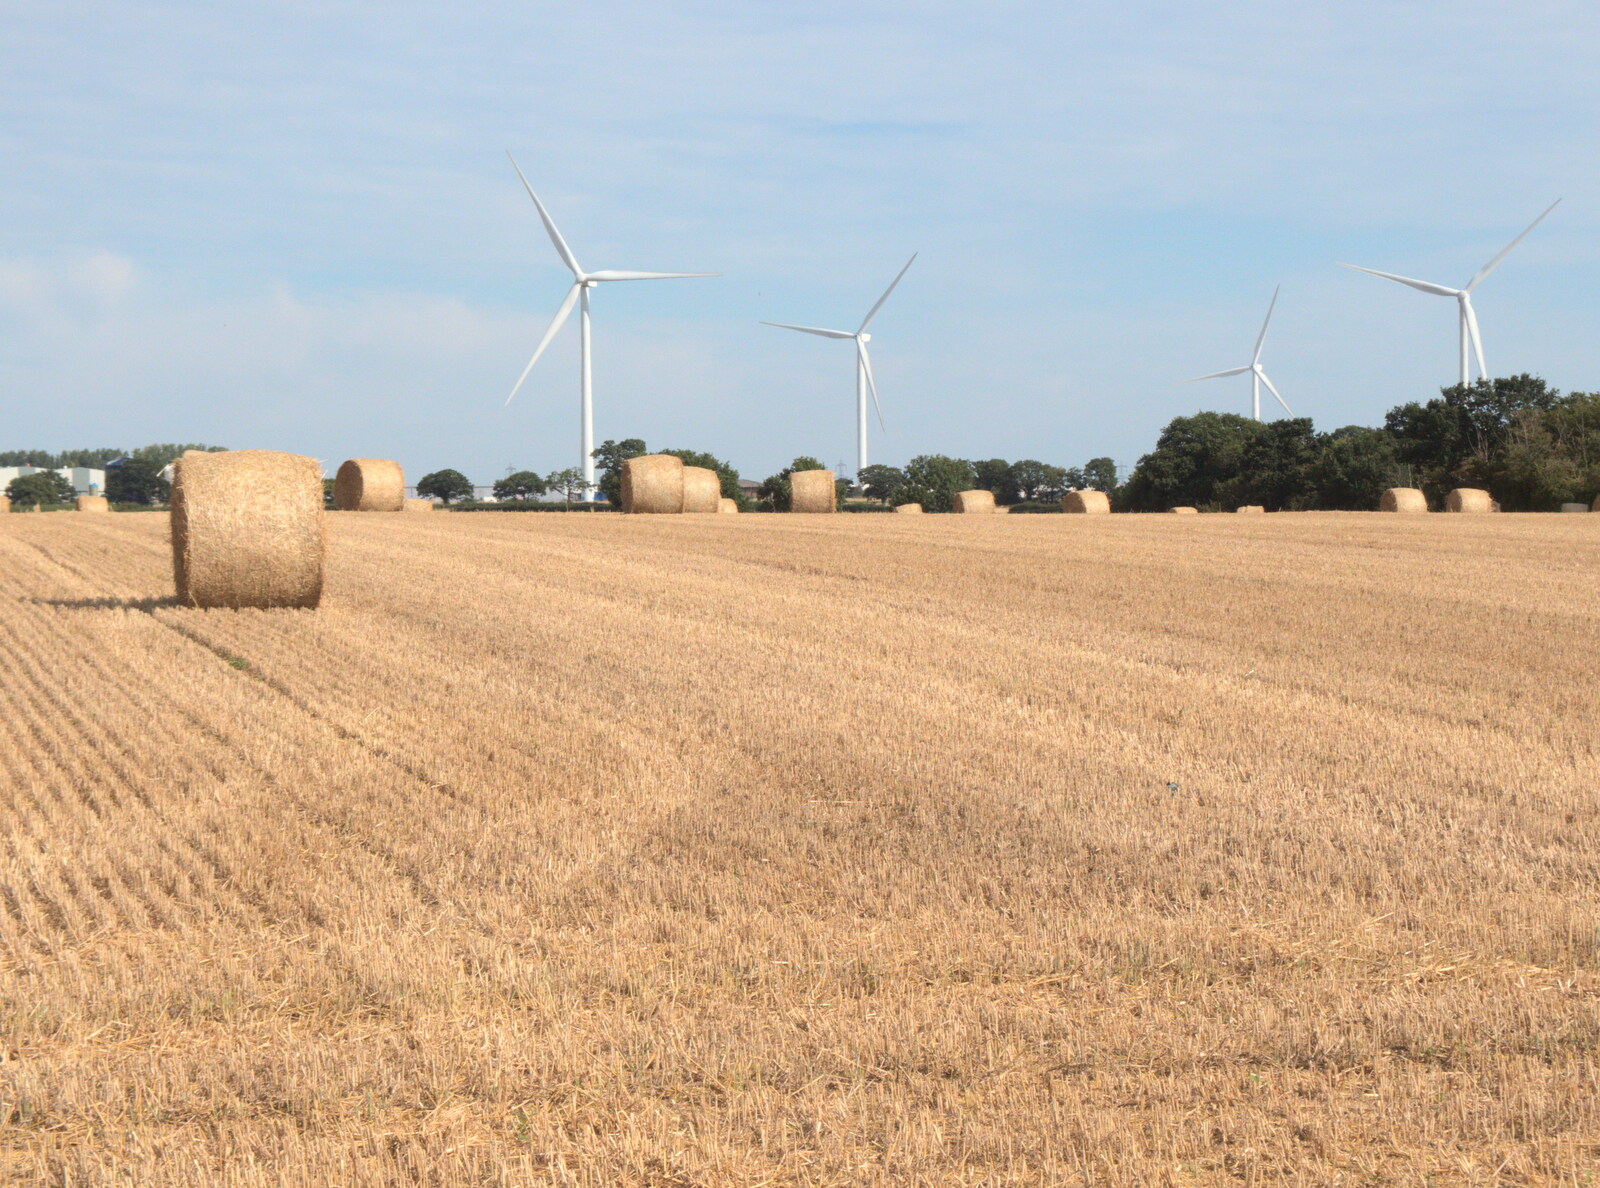 The wind turbines of Eye airfield from The BSCC at The Earl Soham Victoria and Station 119, Eye, Suffolk - 6th August 2020